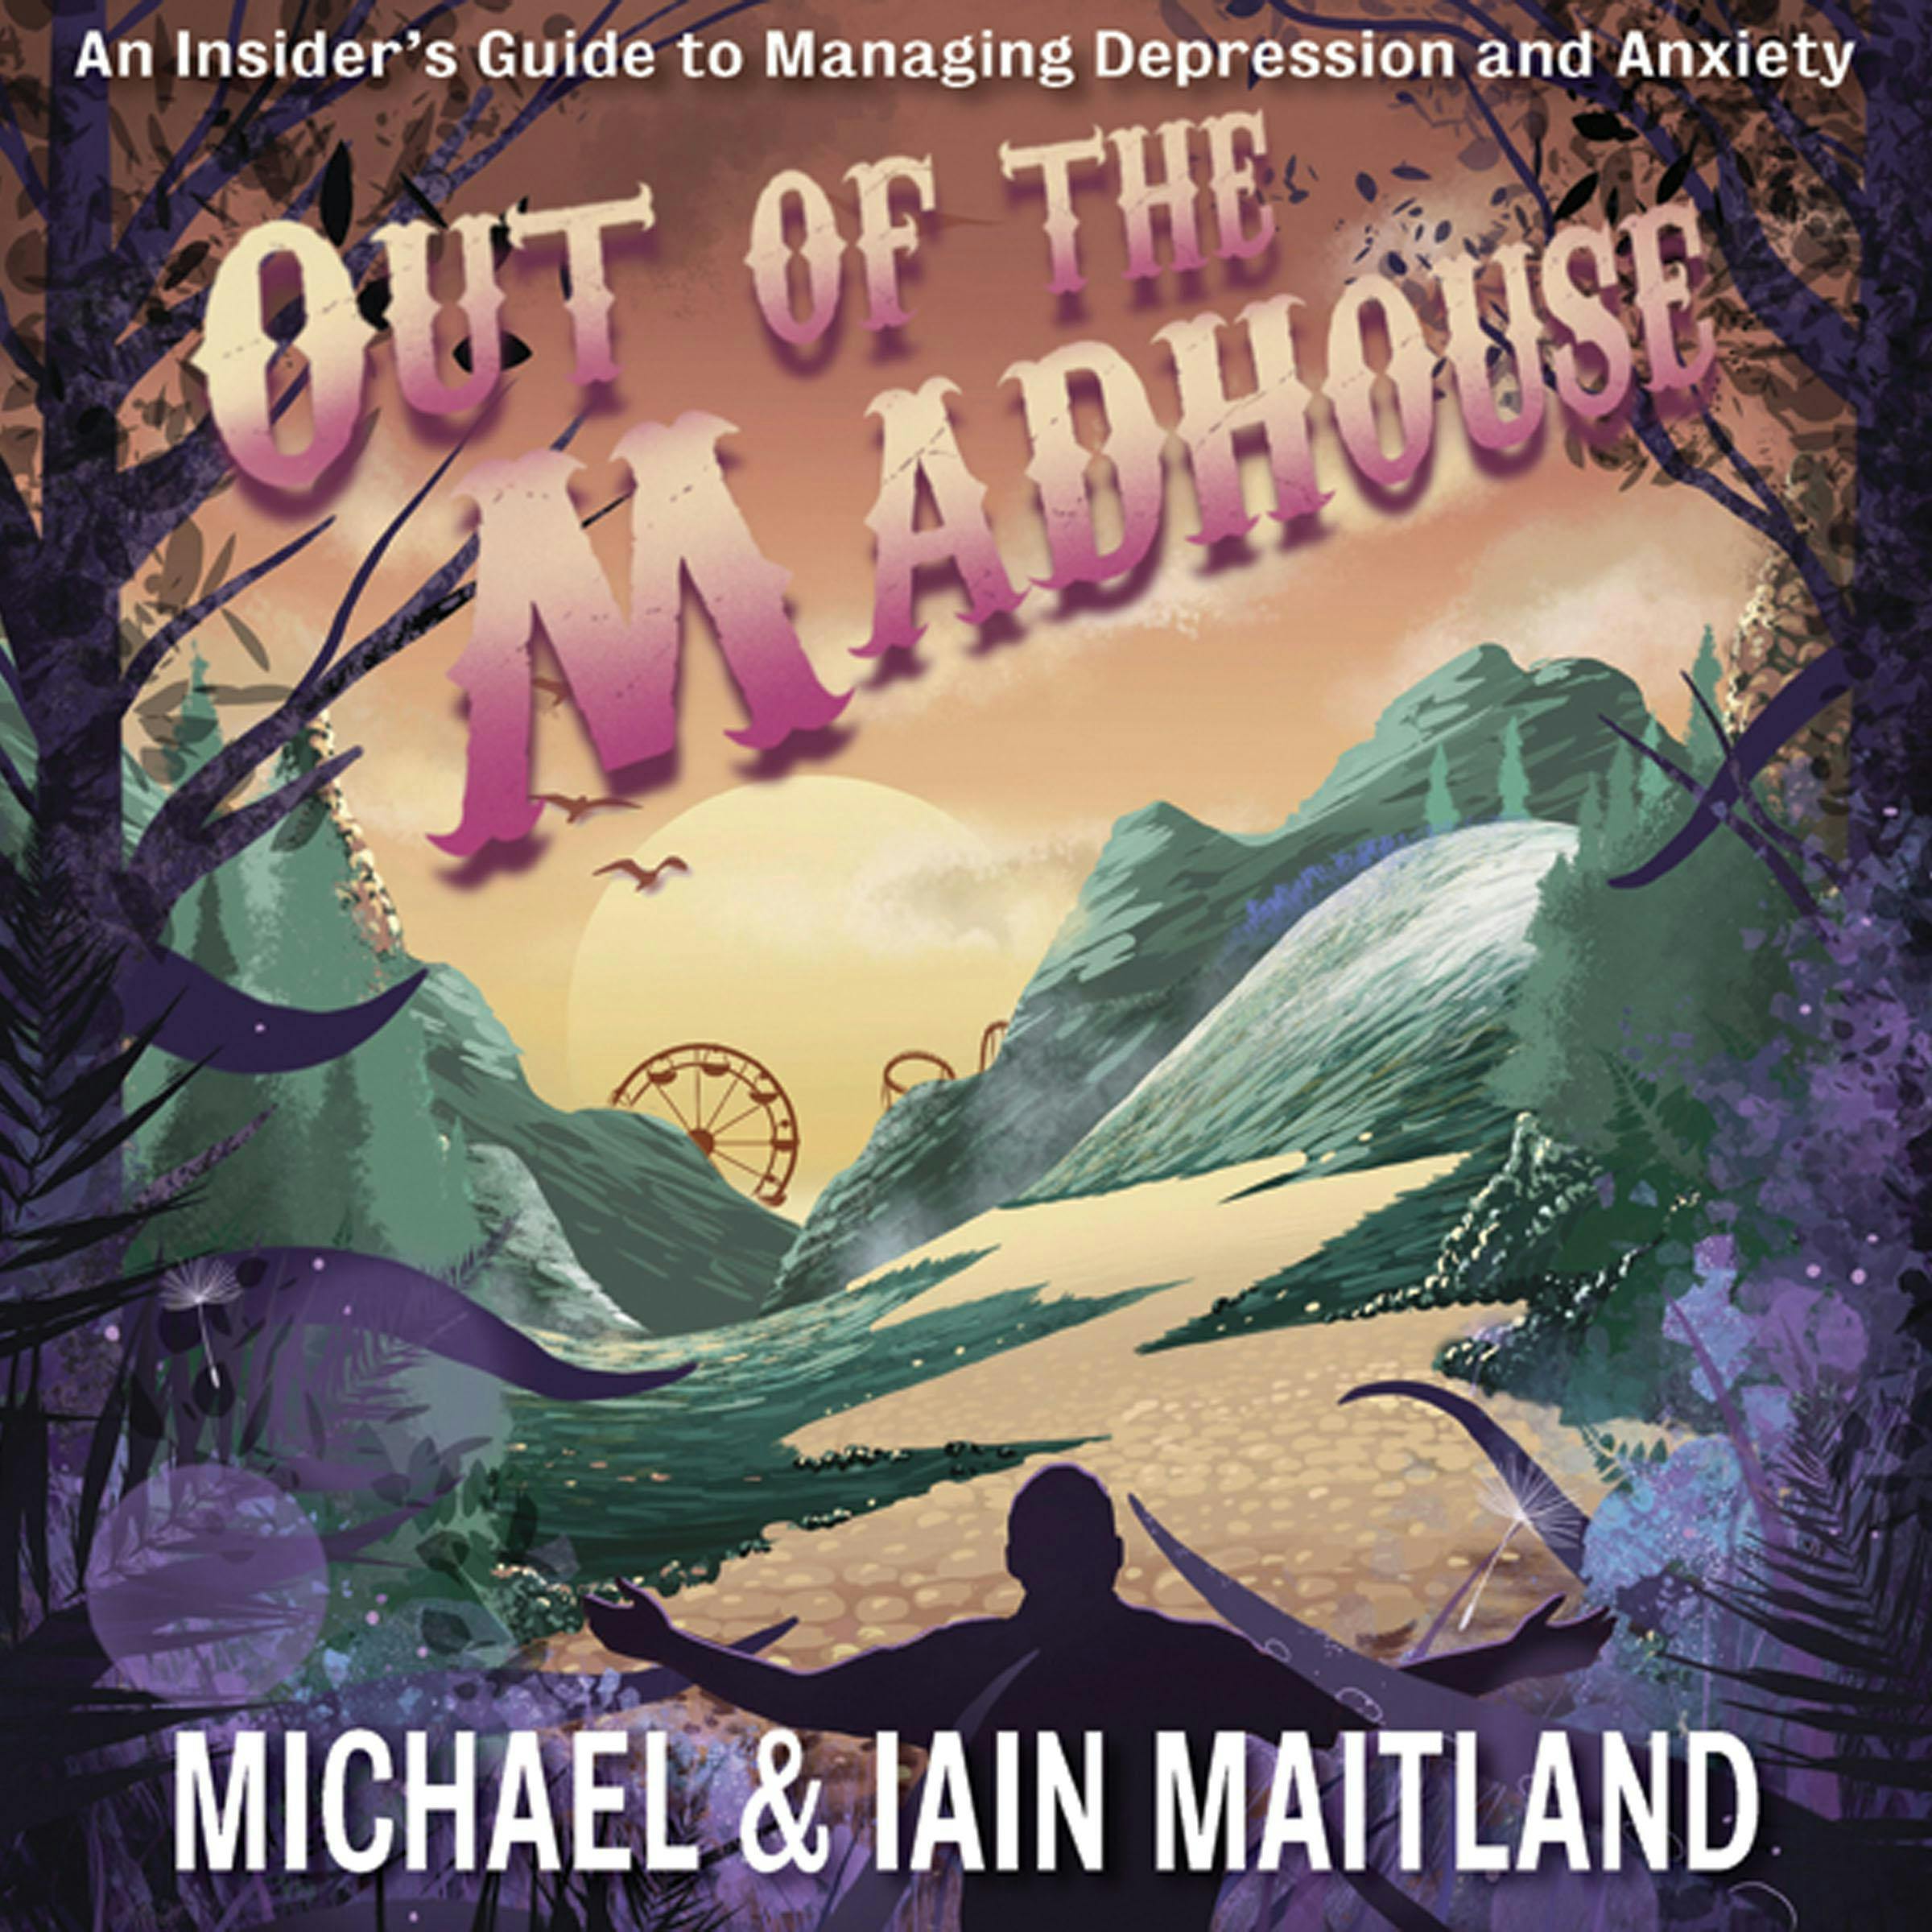 Out of the Madhouse: An Insider's Guide to Managing Depression and Anxiety - Iain Maitland, Michael Maitland